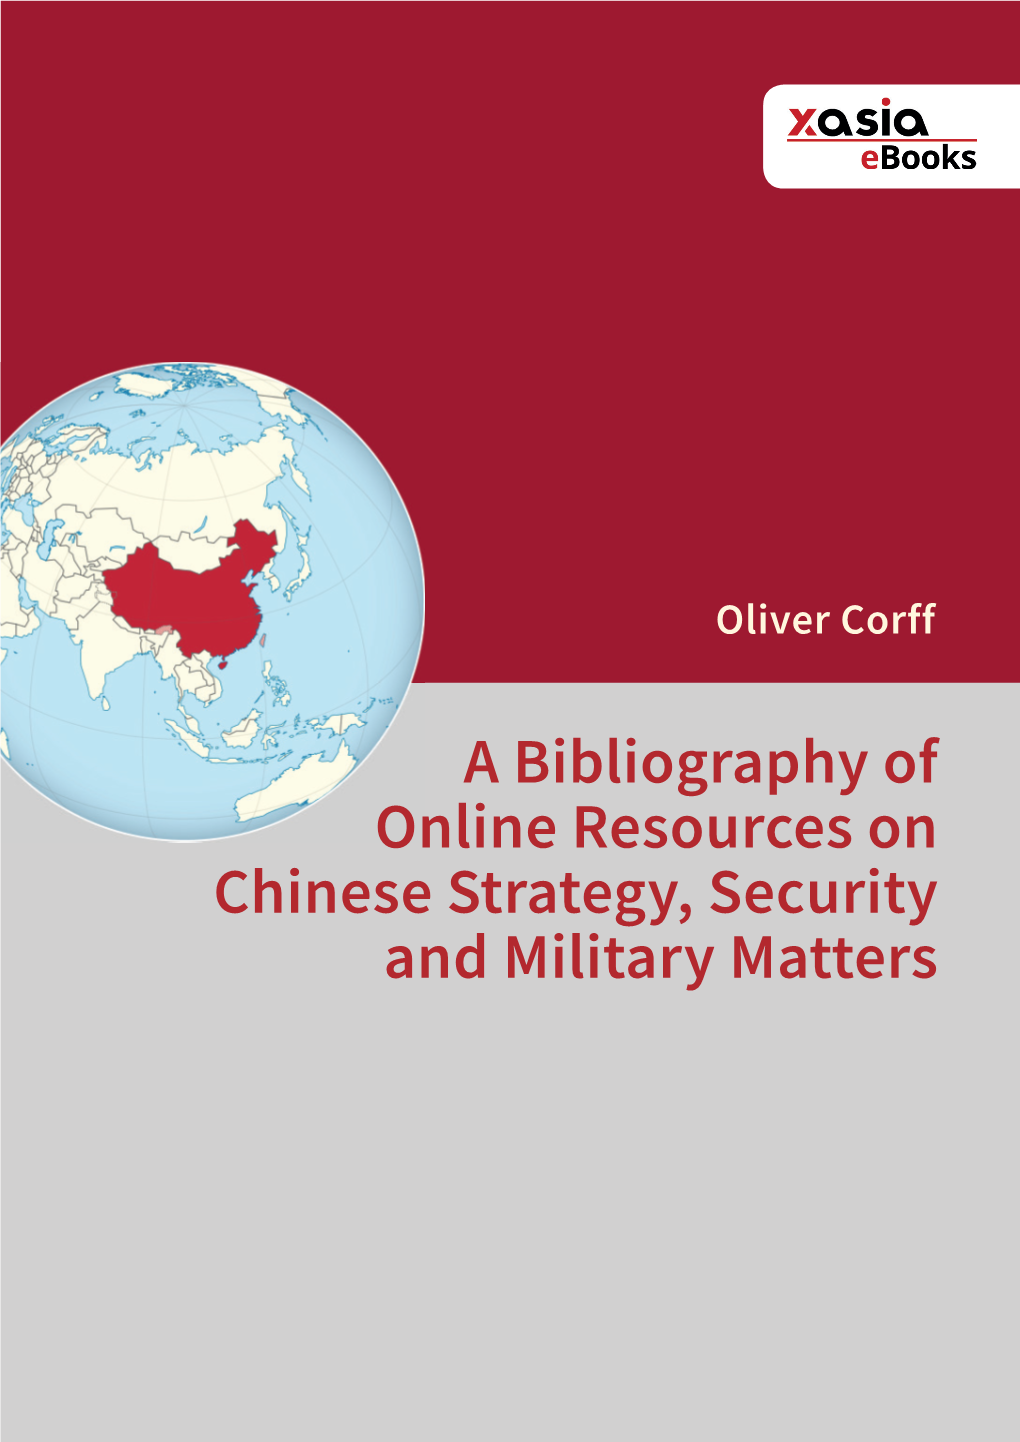 A Bibliography of Online Resources on Chinese Strategy, Security and Military Matters